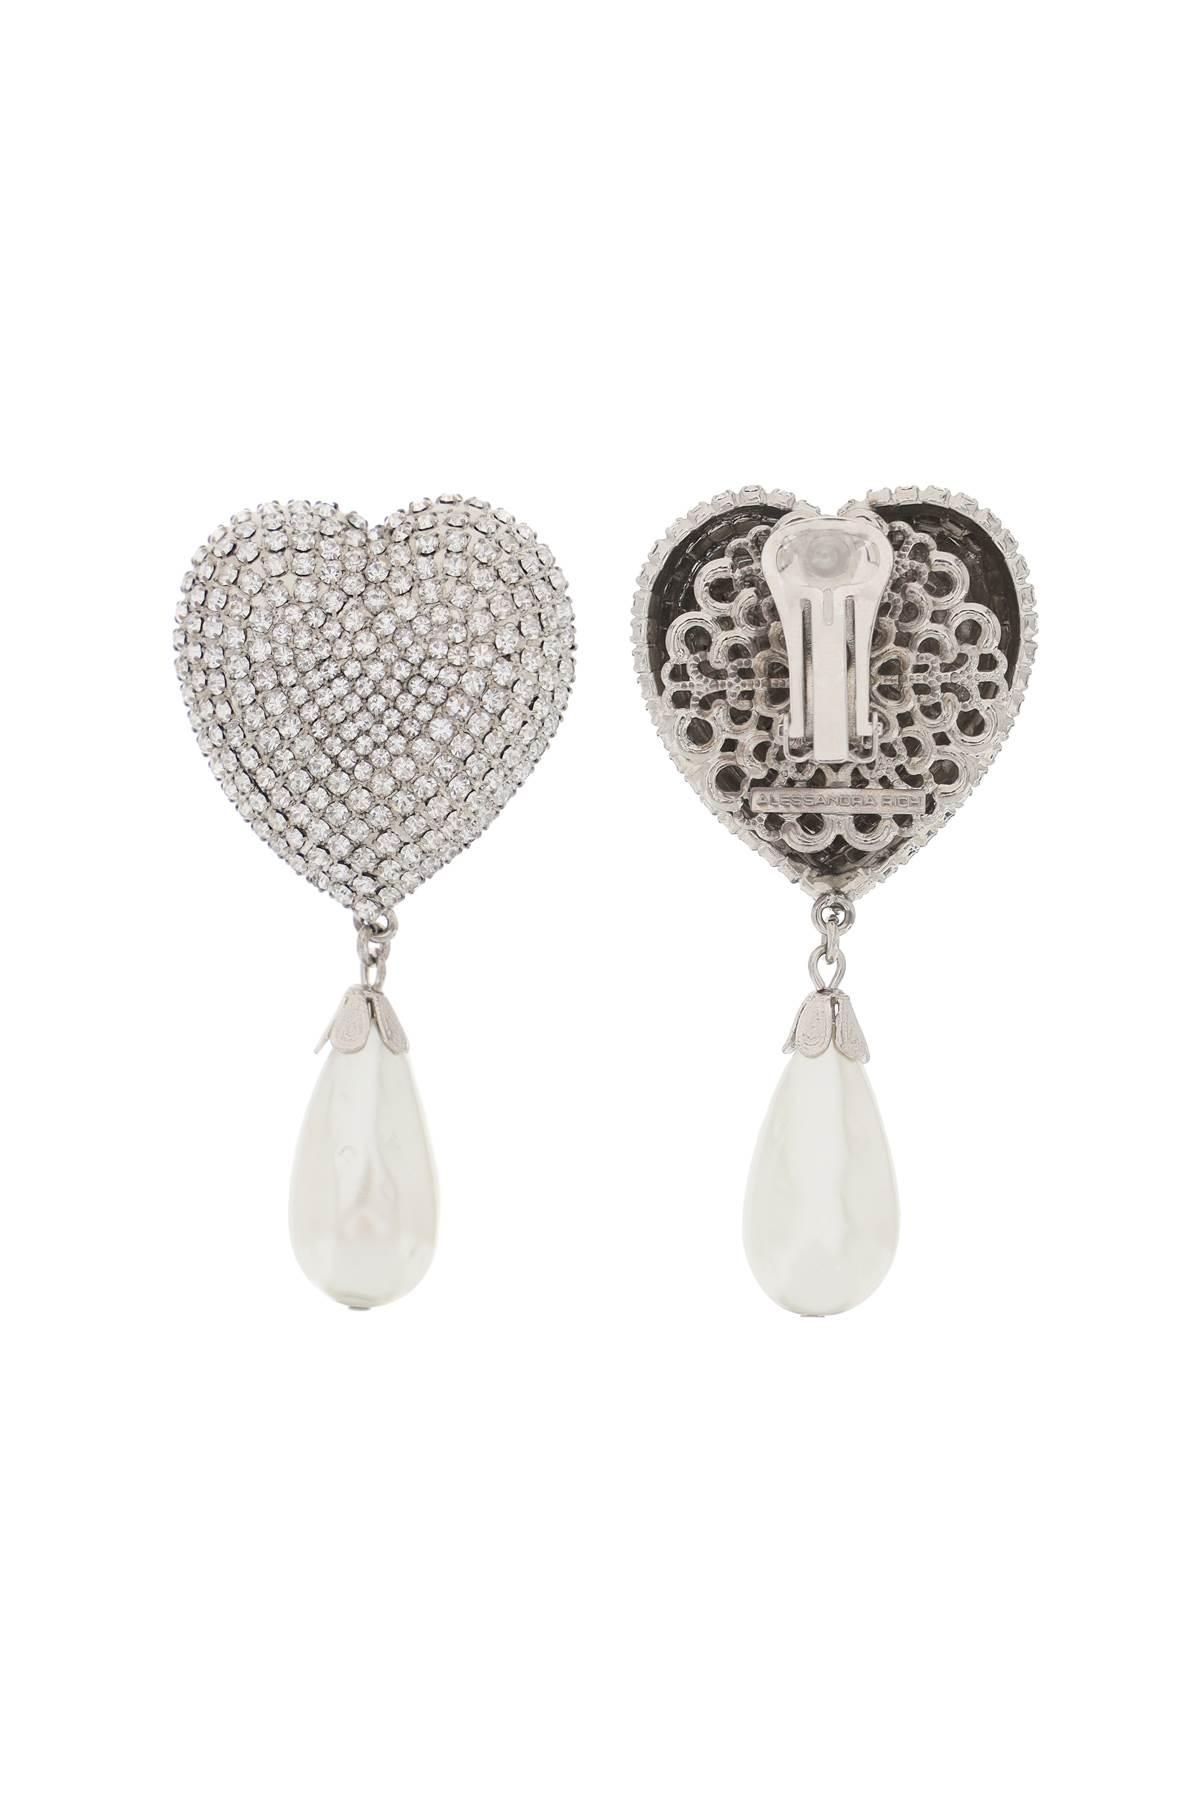 HEART CRYSTAL EARRINGS WITH PEARLS - 3